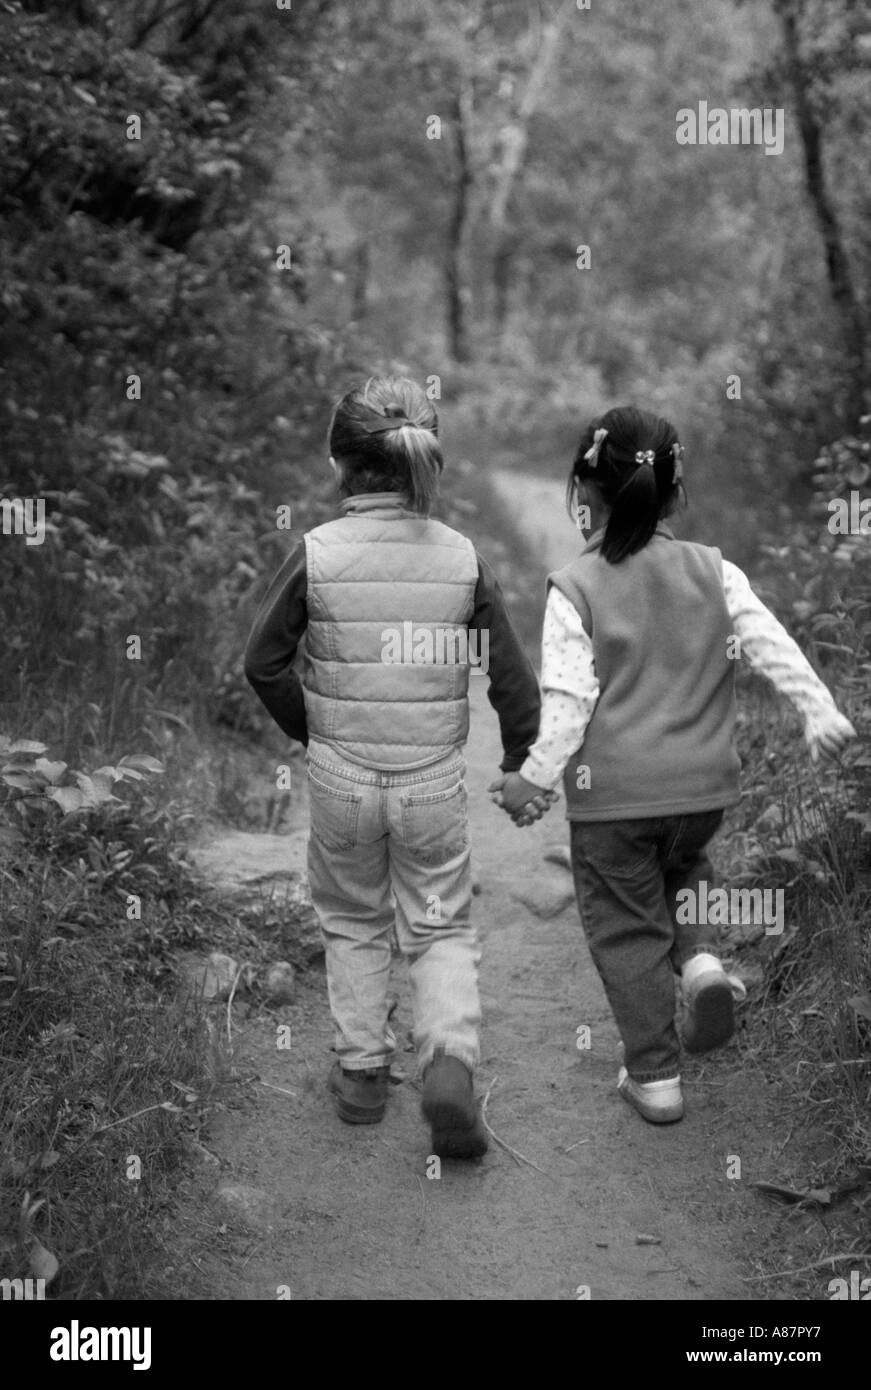 Black and white image of two young girls holding hands and hiking on a path through the forest Stock Photo